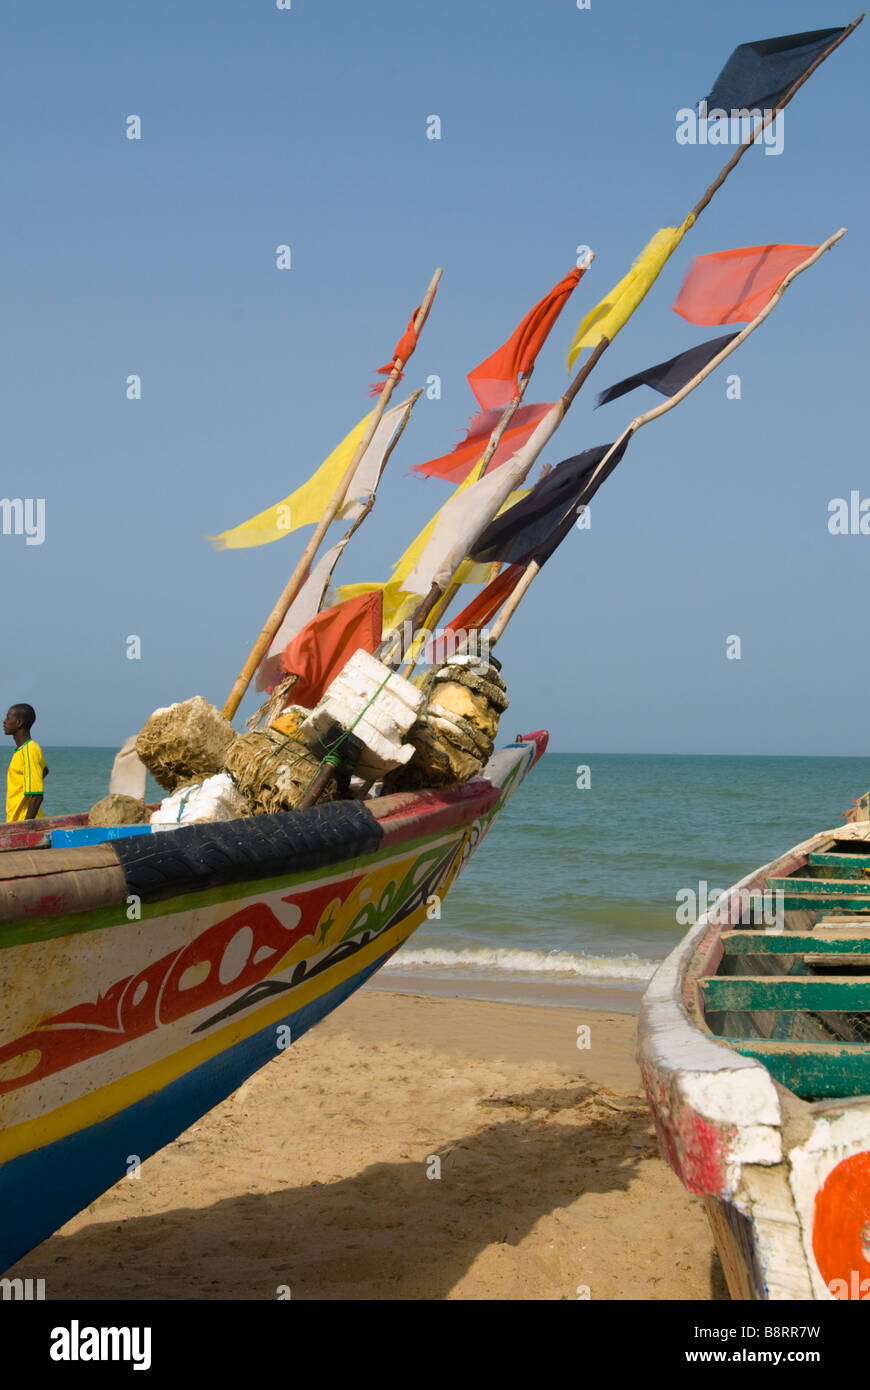 Painted fishing boats and colourful flags in the wind on a beach in Nianing Senegal West Africa Stock Photo